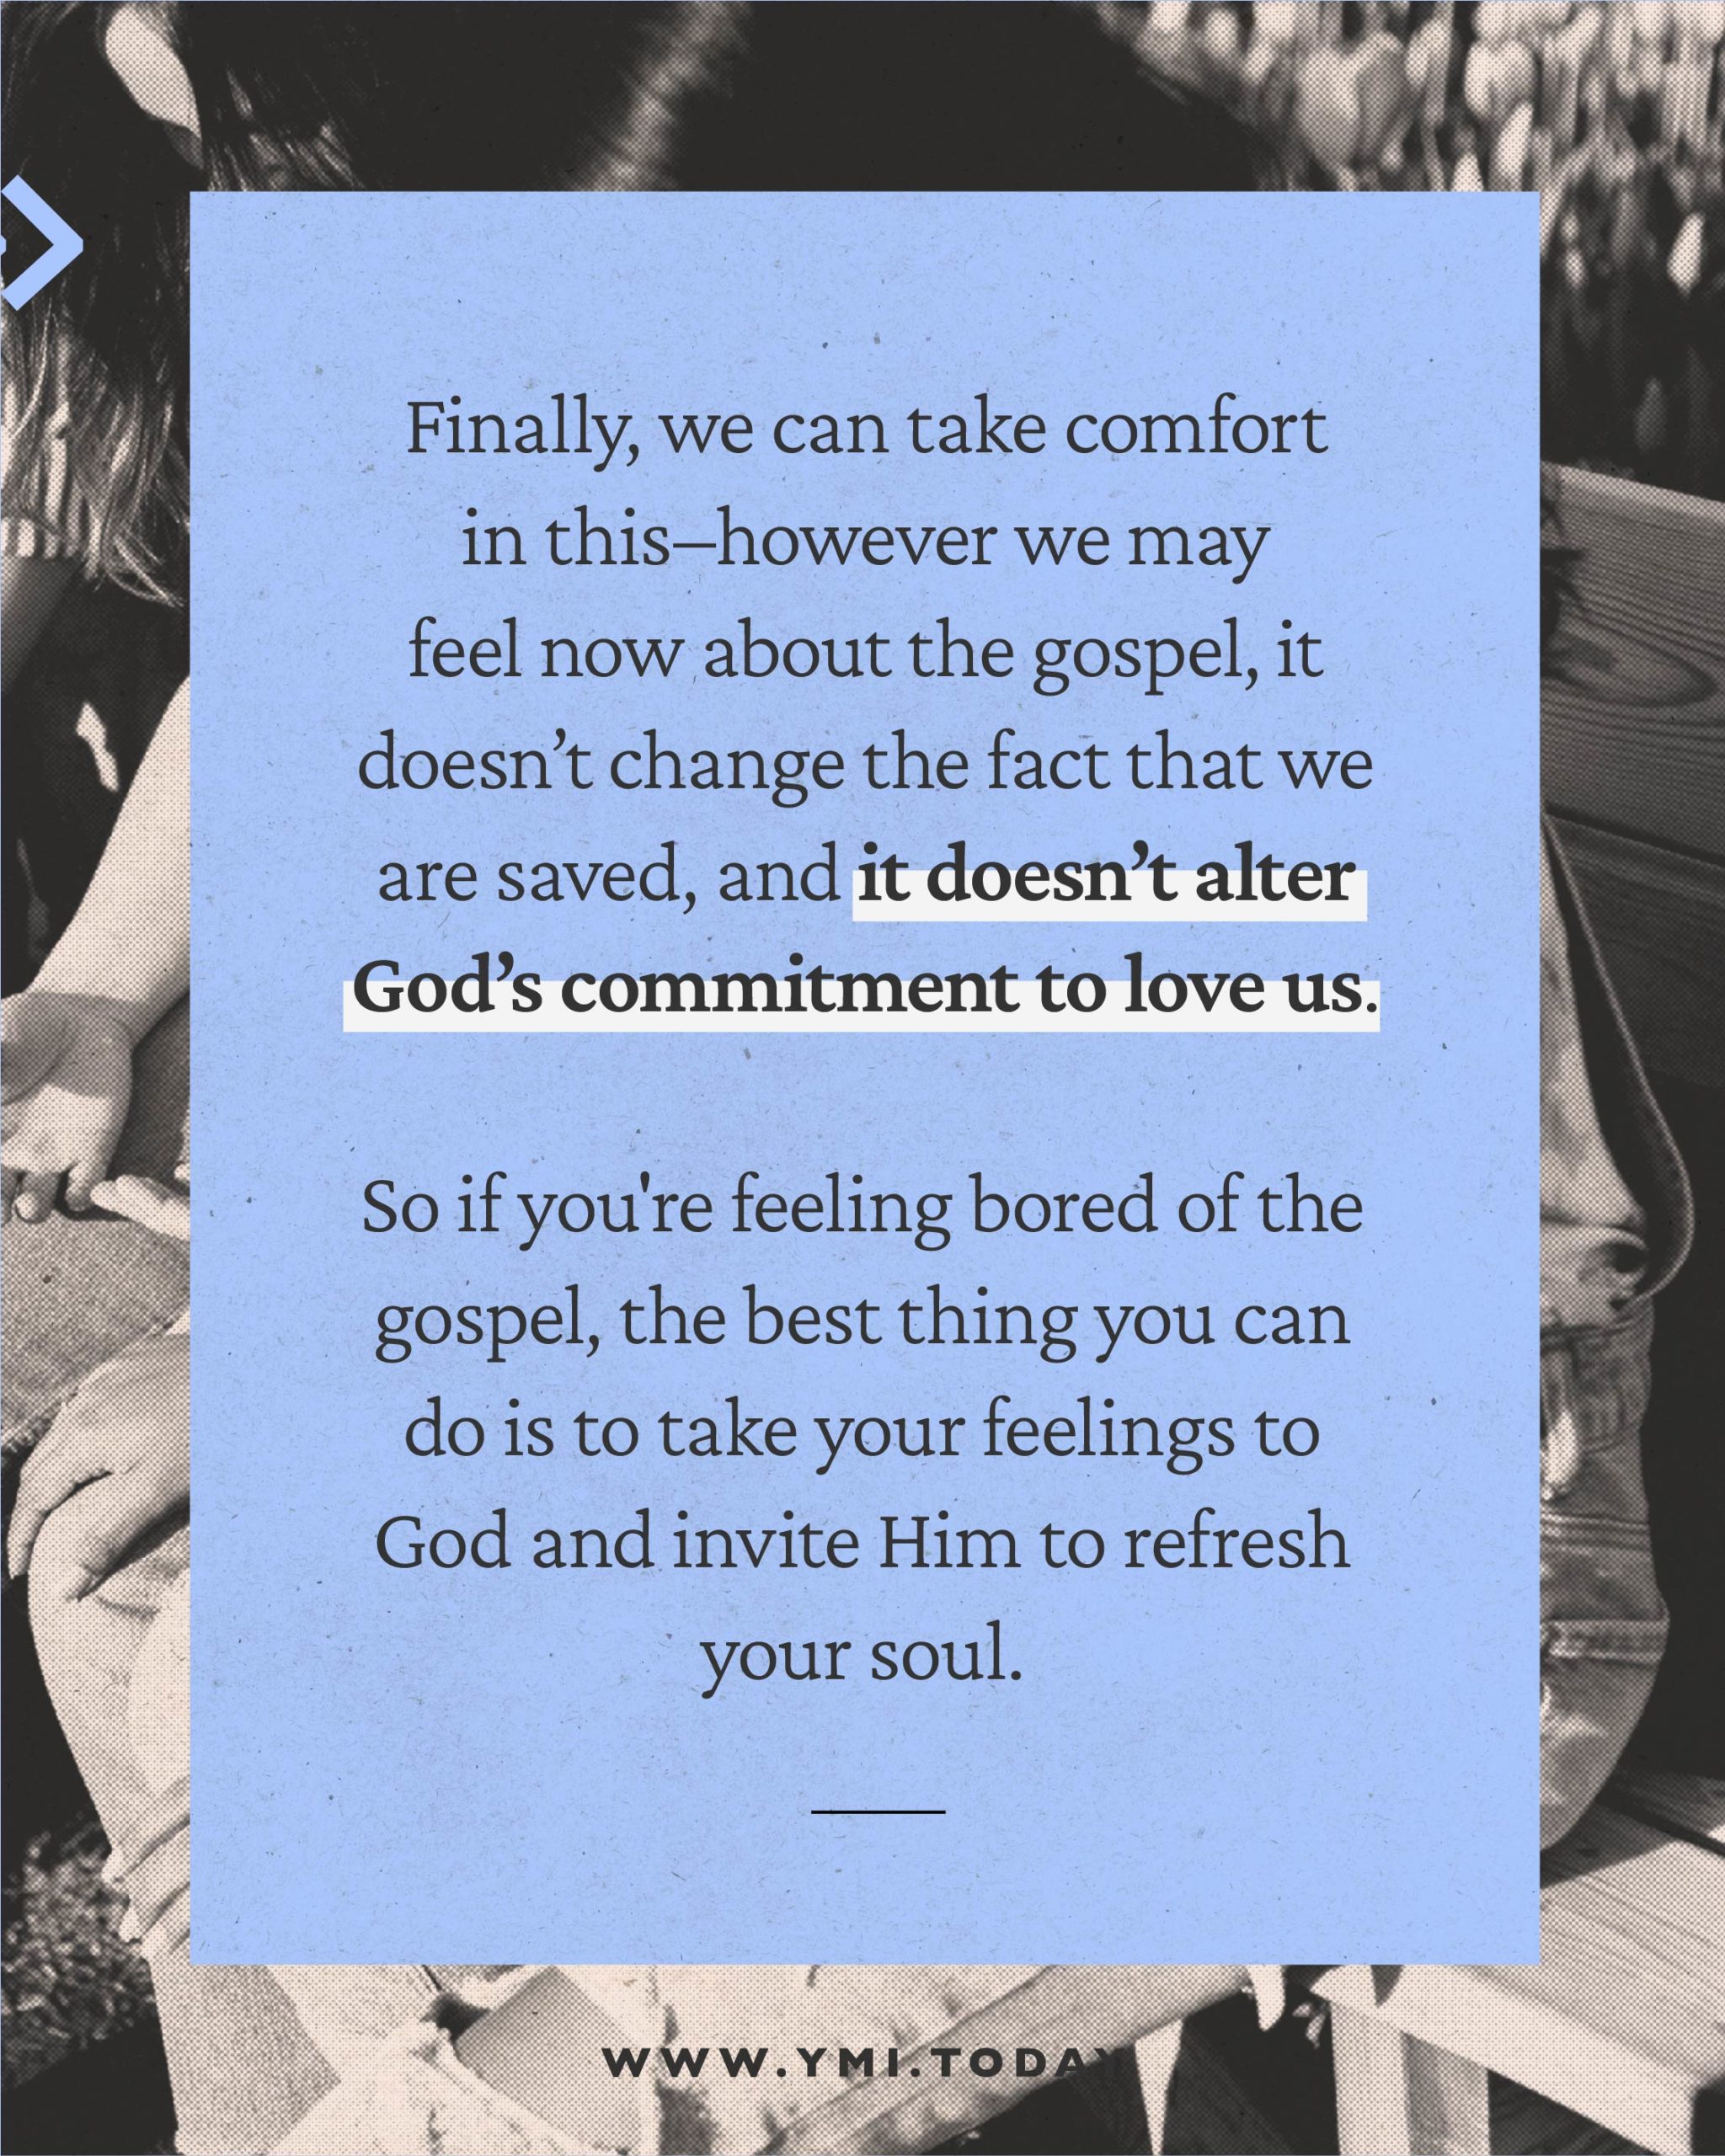 Our feelings about the Gospel doesn't alter God's commitment to love us